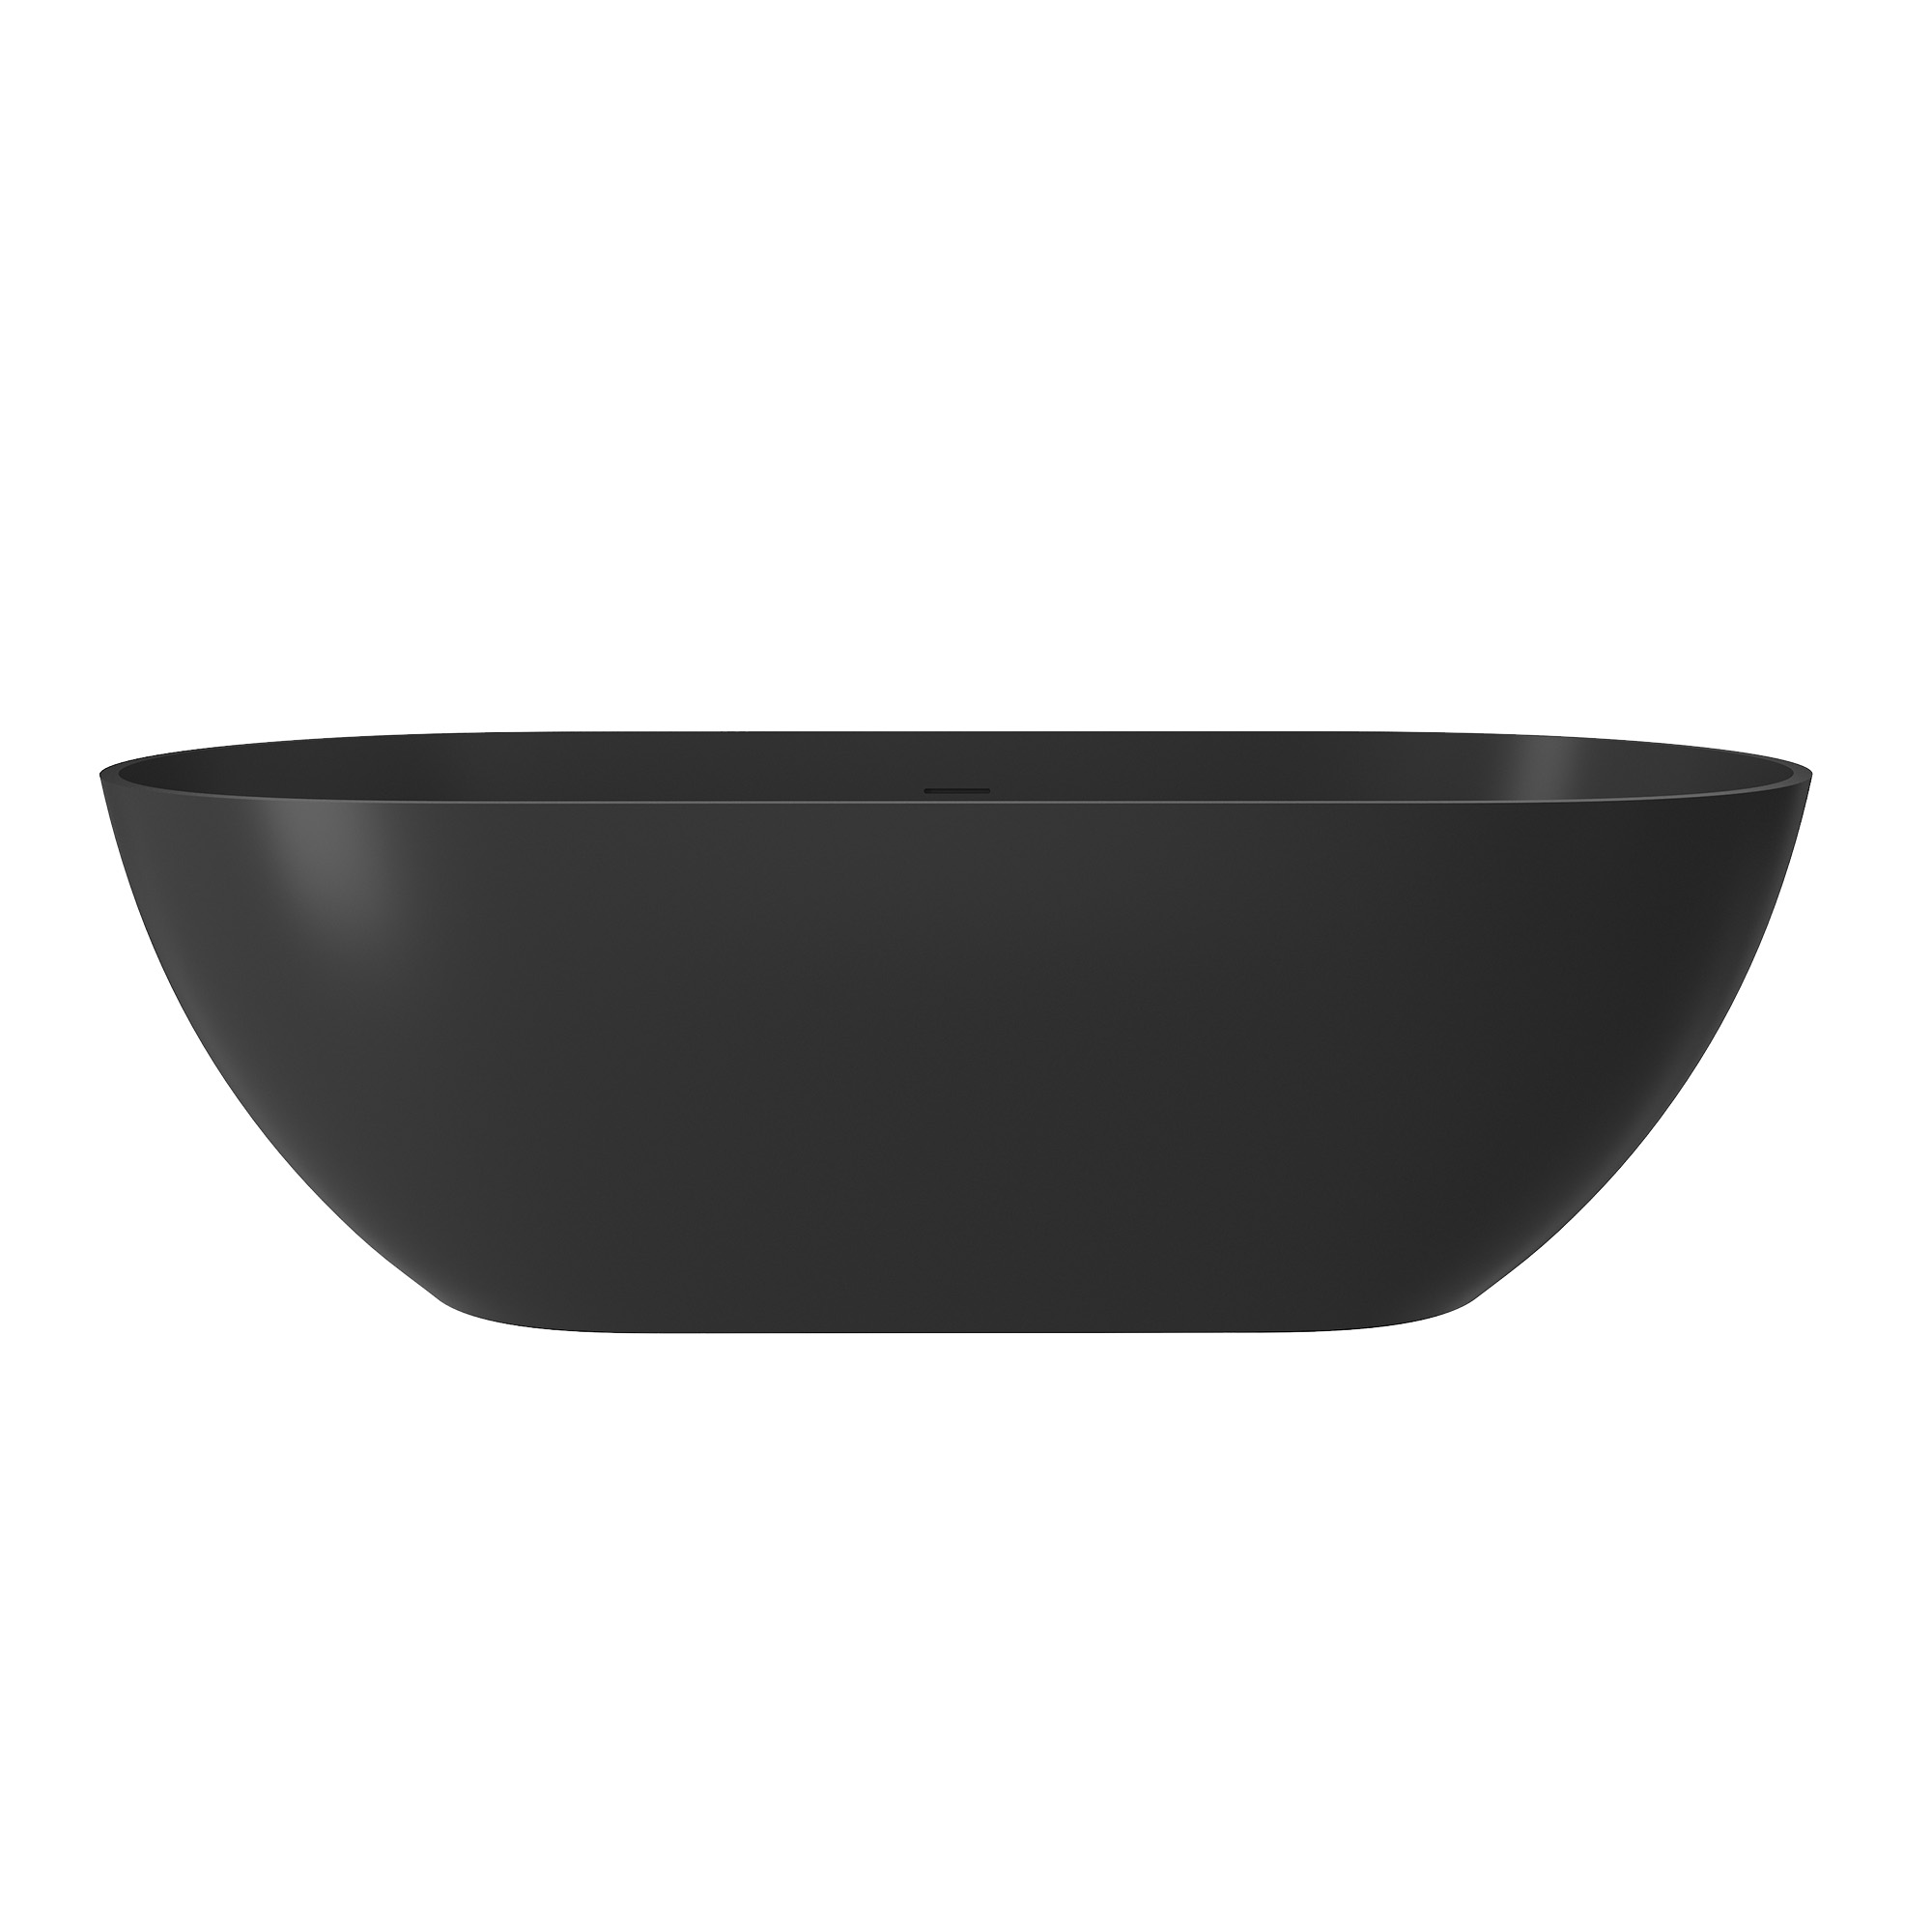 59"/69"Solid Surface Curved Freestanding Tub Sets in Two Colors Options(Matte Black& Grey), Deepest Soaking Tub Combines Elegance with Overflow and Complimentary Pop Up Drain